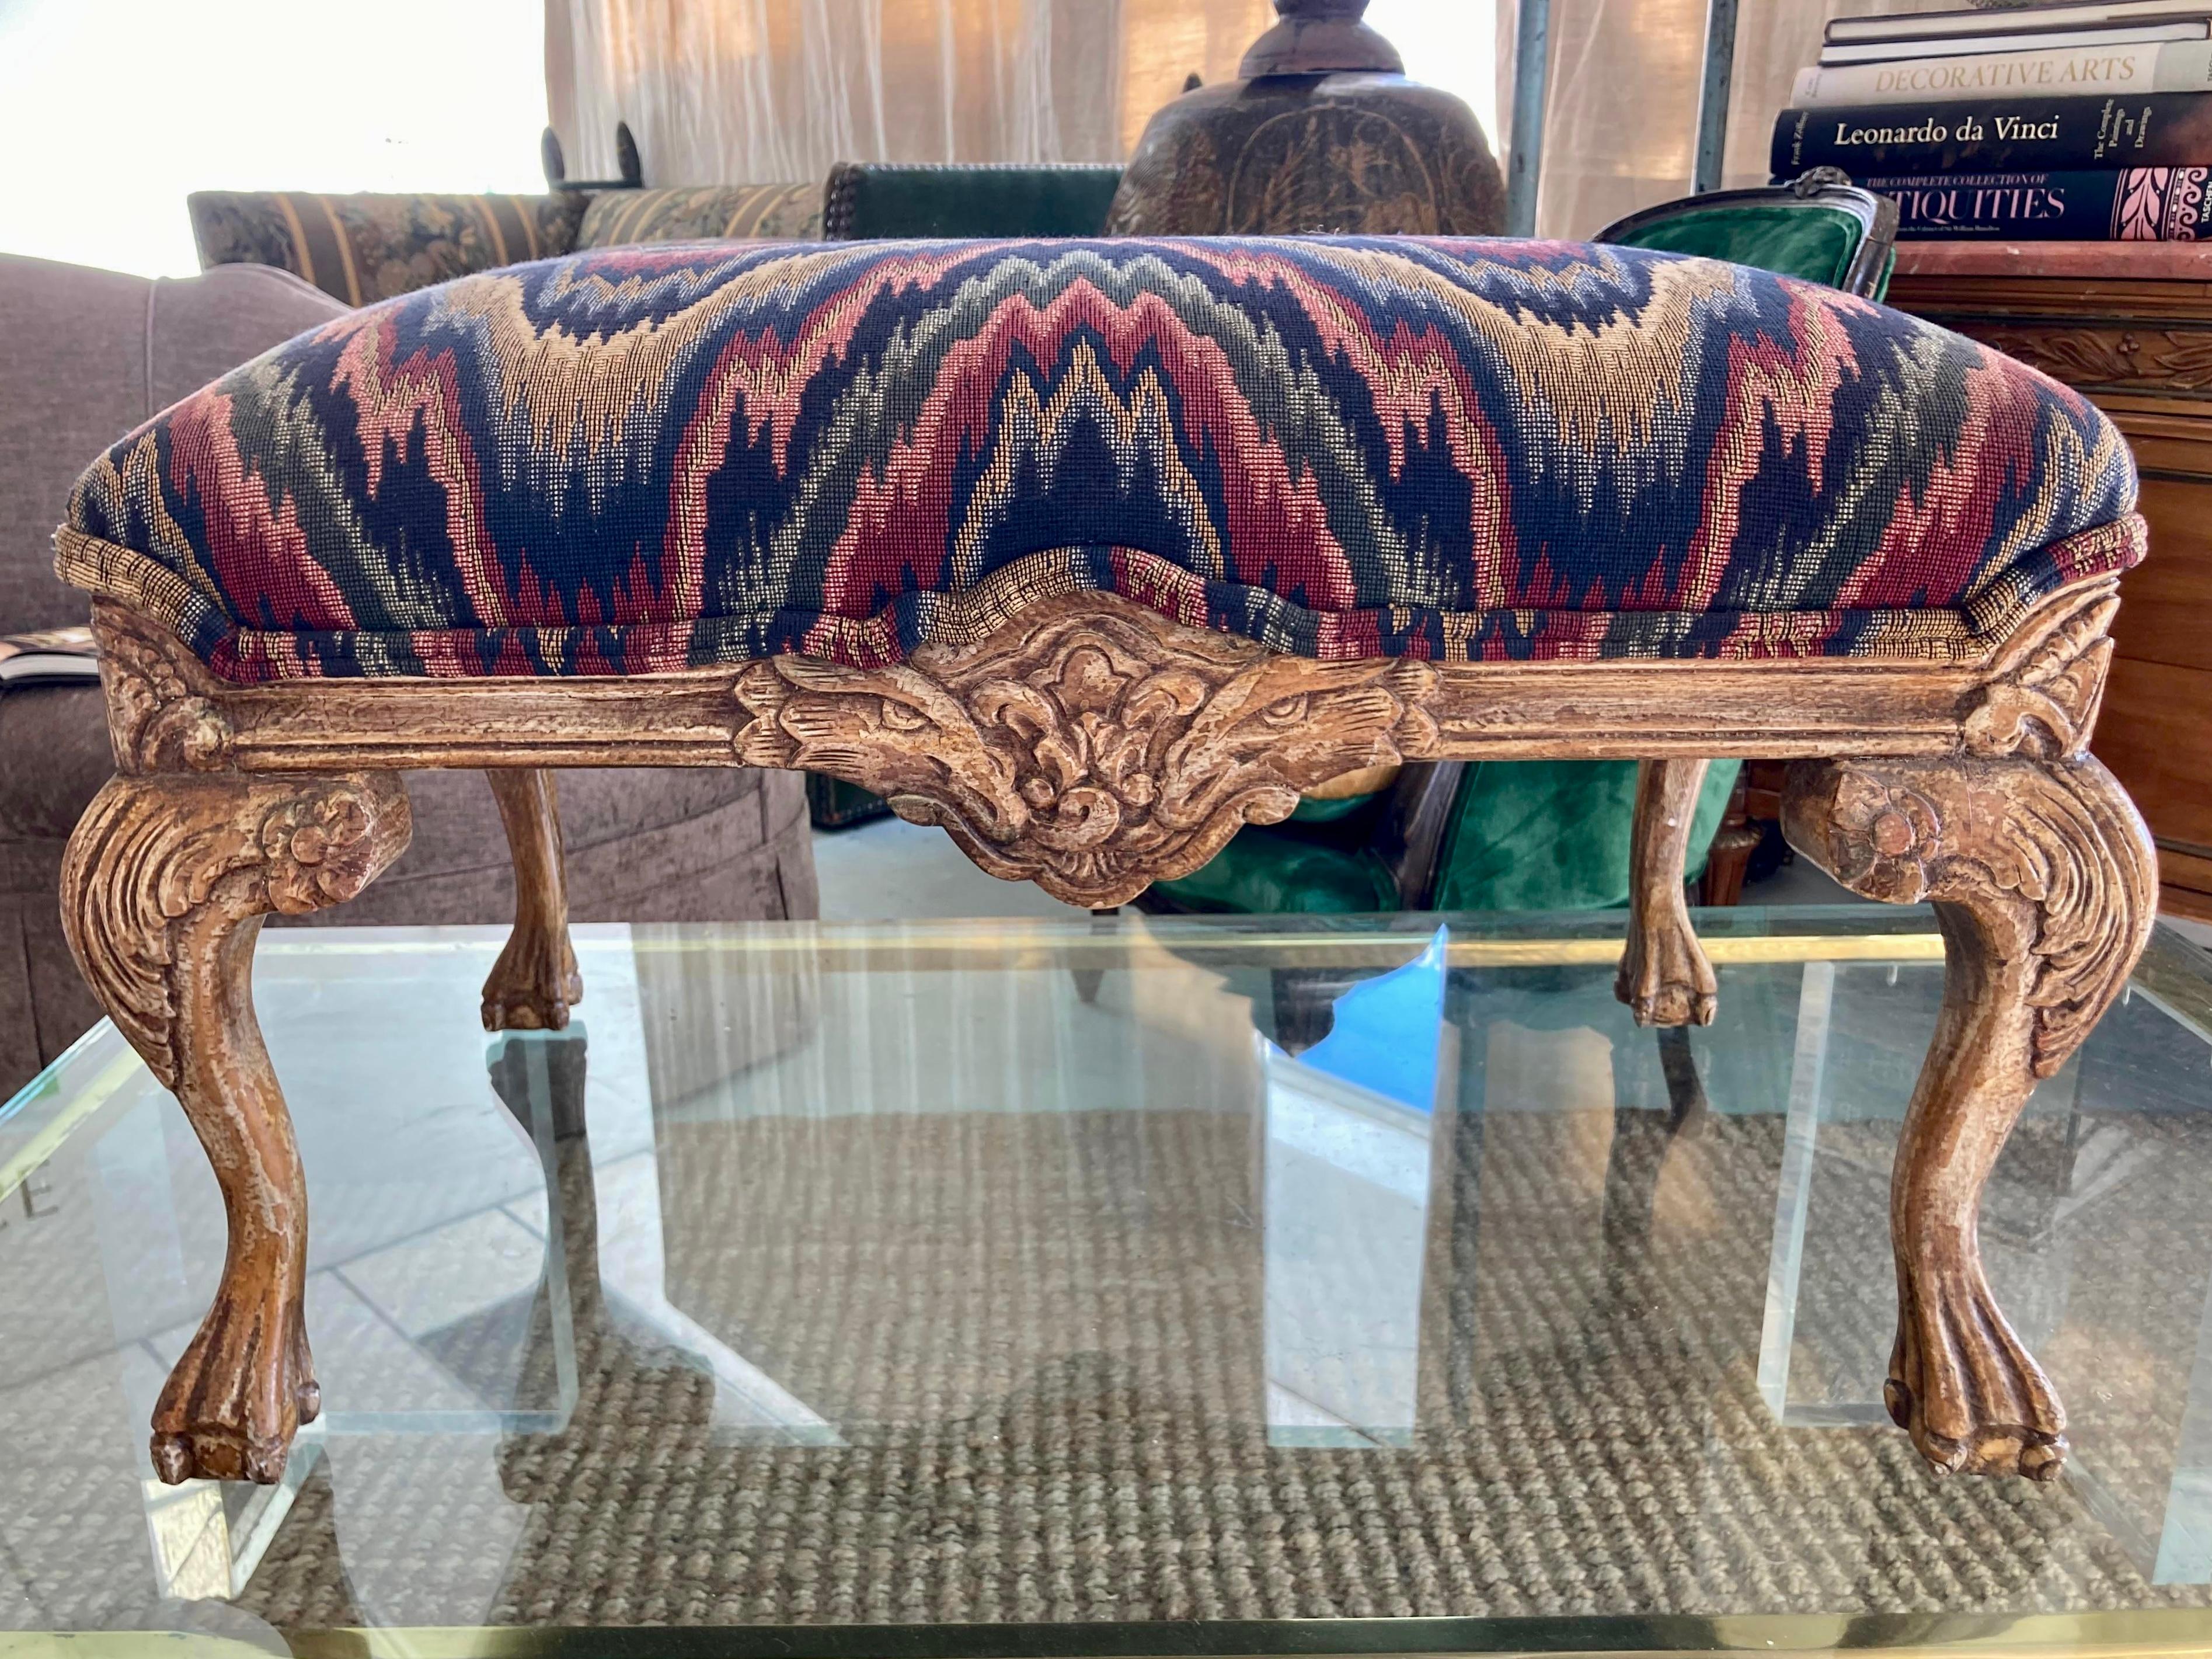 Beautiful Italian hand carved wood frame upholstered ottoman. We have 2 in inventory so collect both. Original painted finish that highlights the carving details. Nice quality upholstery work, too. Add some Italian style to your home.